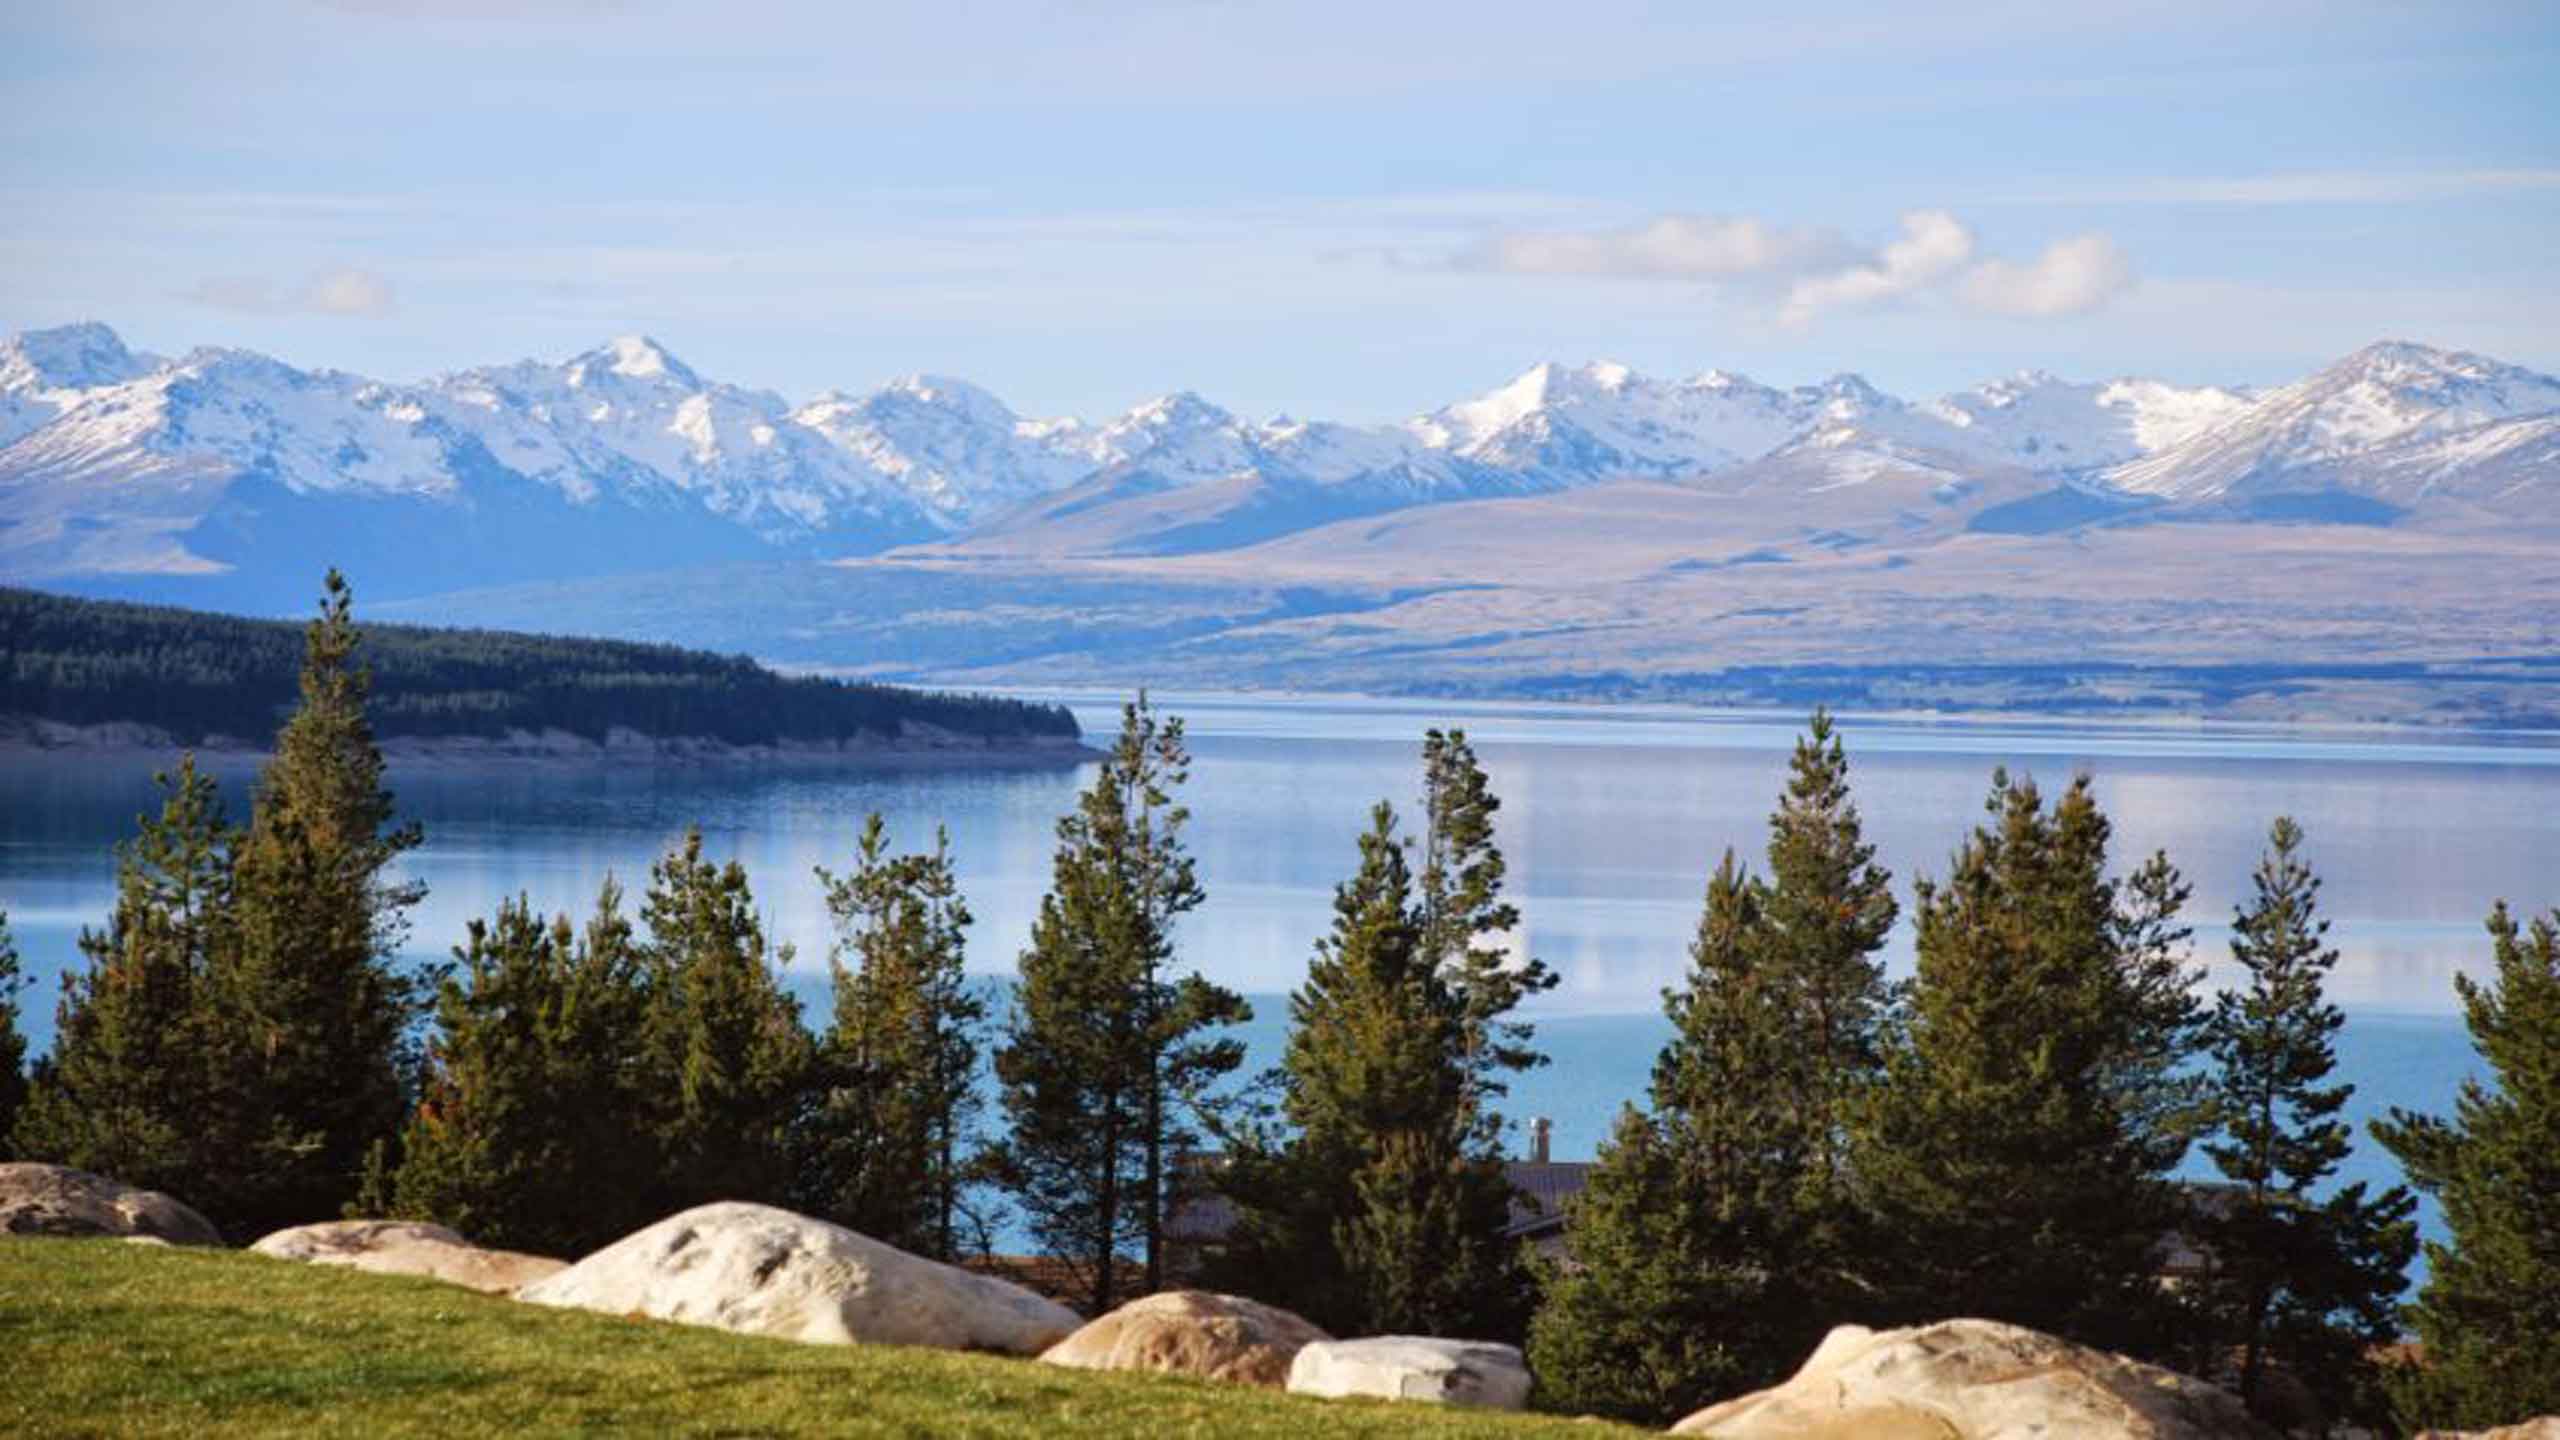 mt-cook-lakeside-retreat-new-zealand-view-over-lake-pukaki-in-foreground